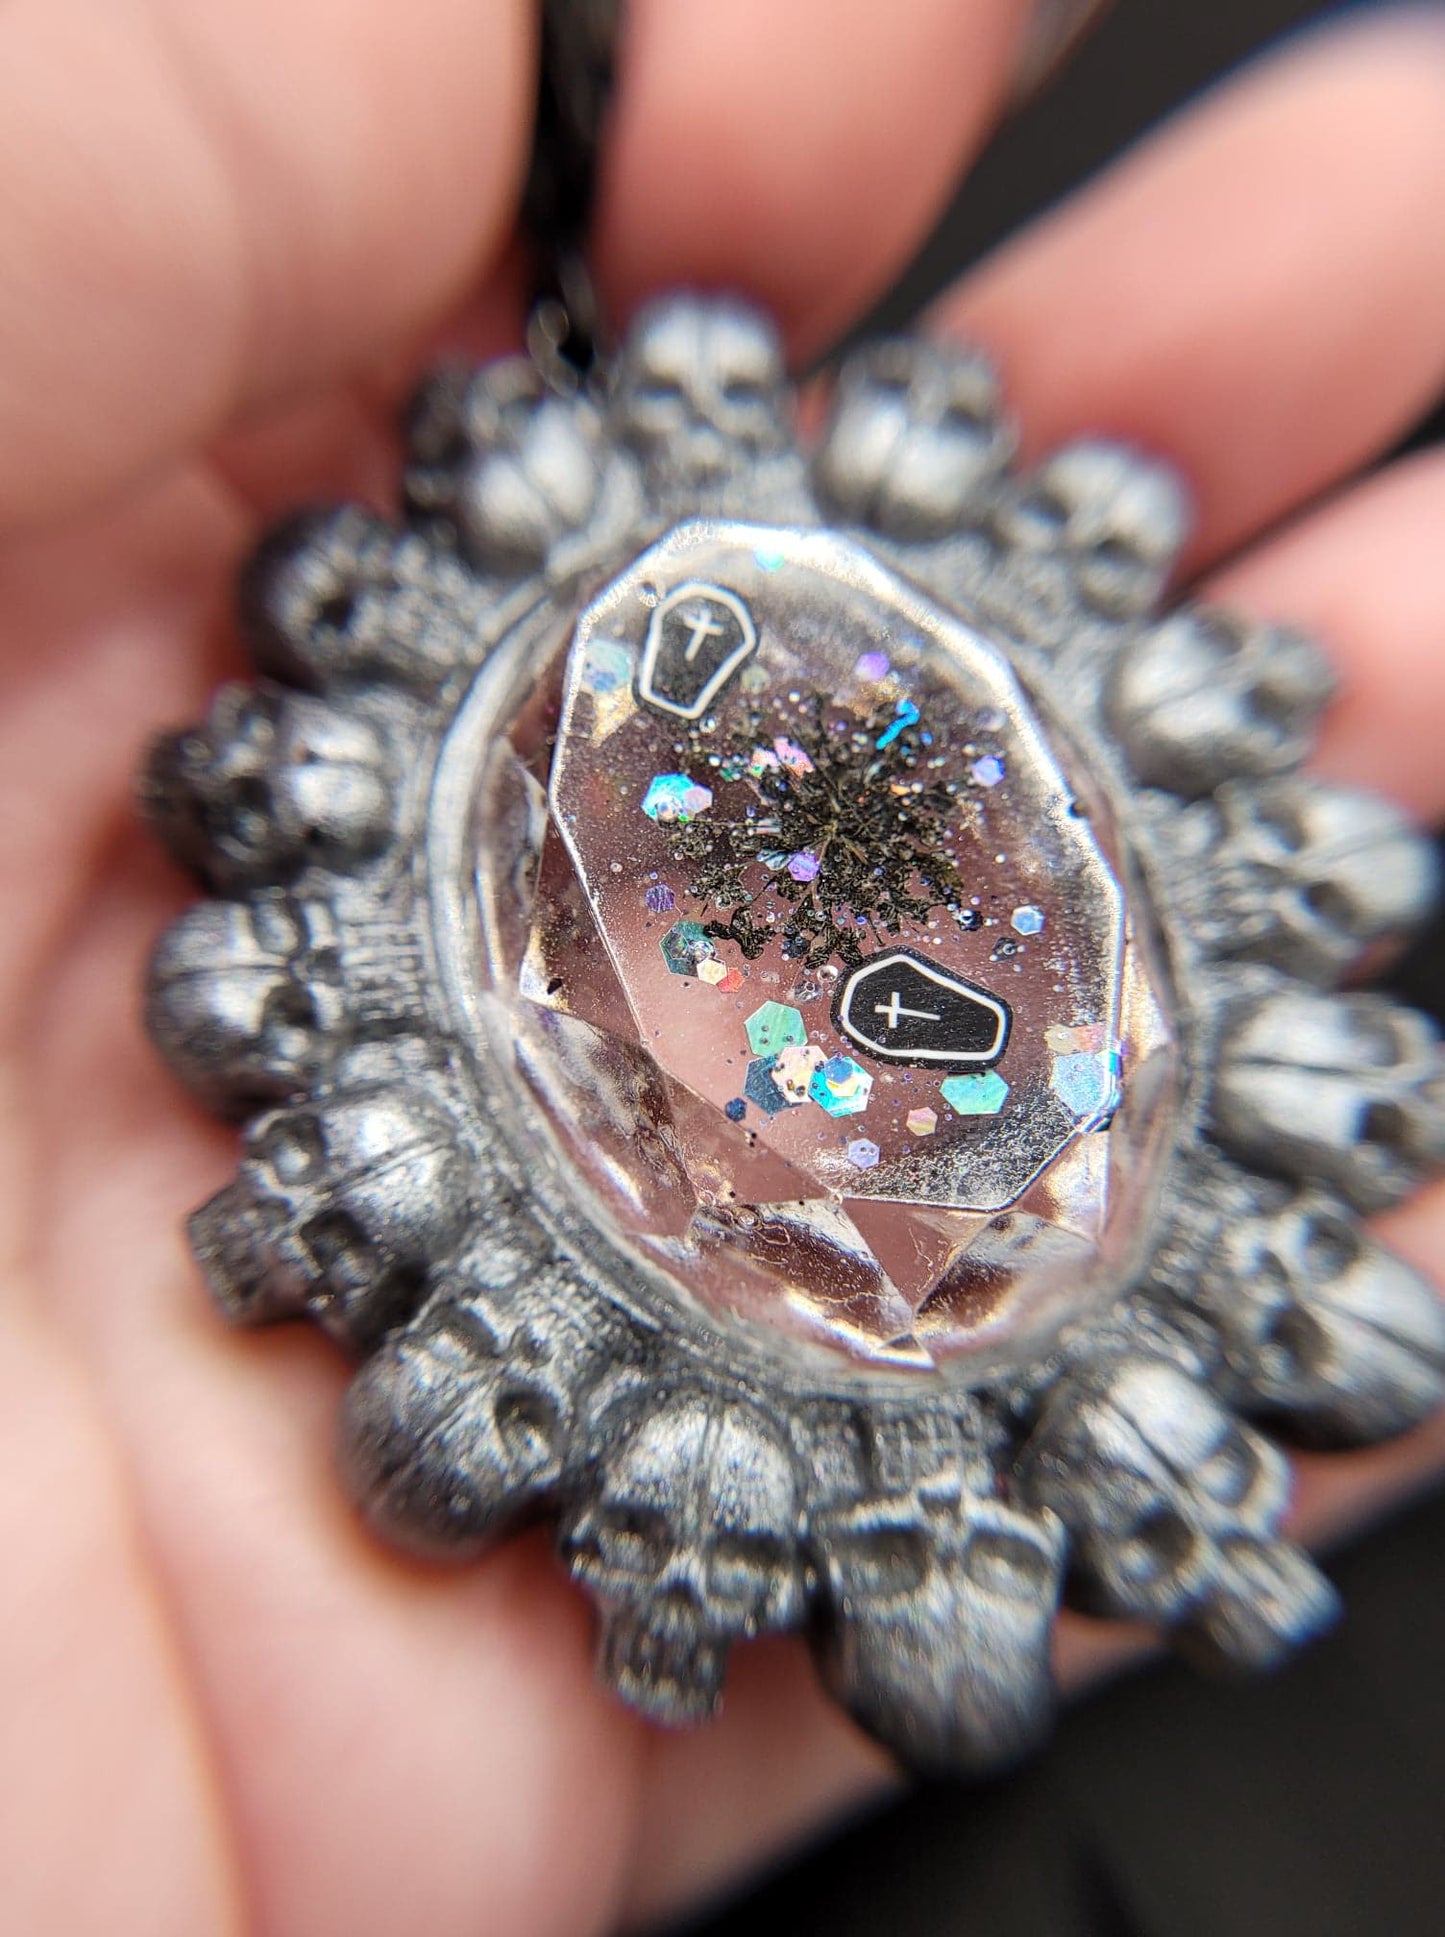 Unique Handmade Goth Resin Silver Skull Faceted Cabochon Pendant with Coffins, Black Pressed Queen Anne's Lace, and Black Multichrome Glitter